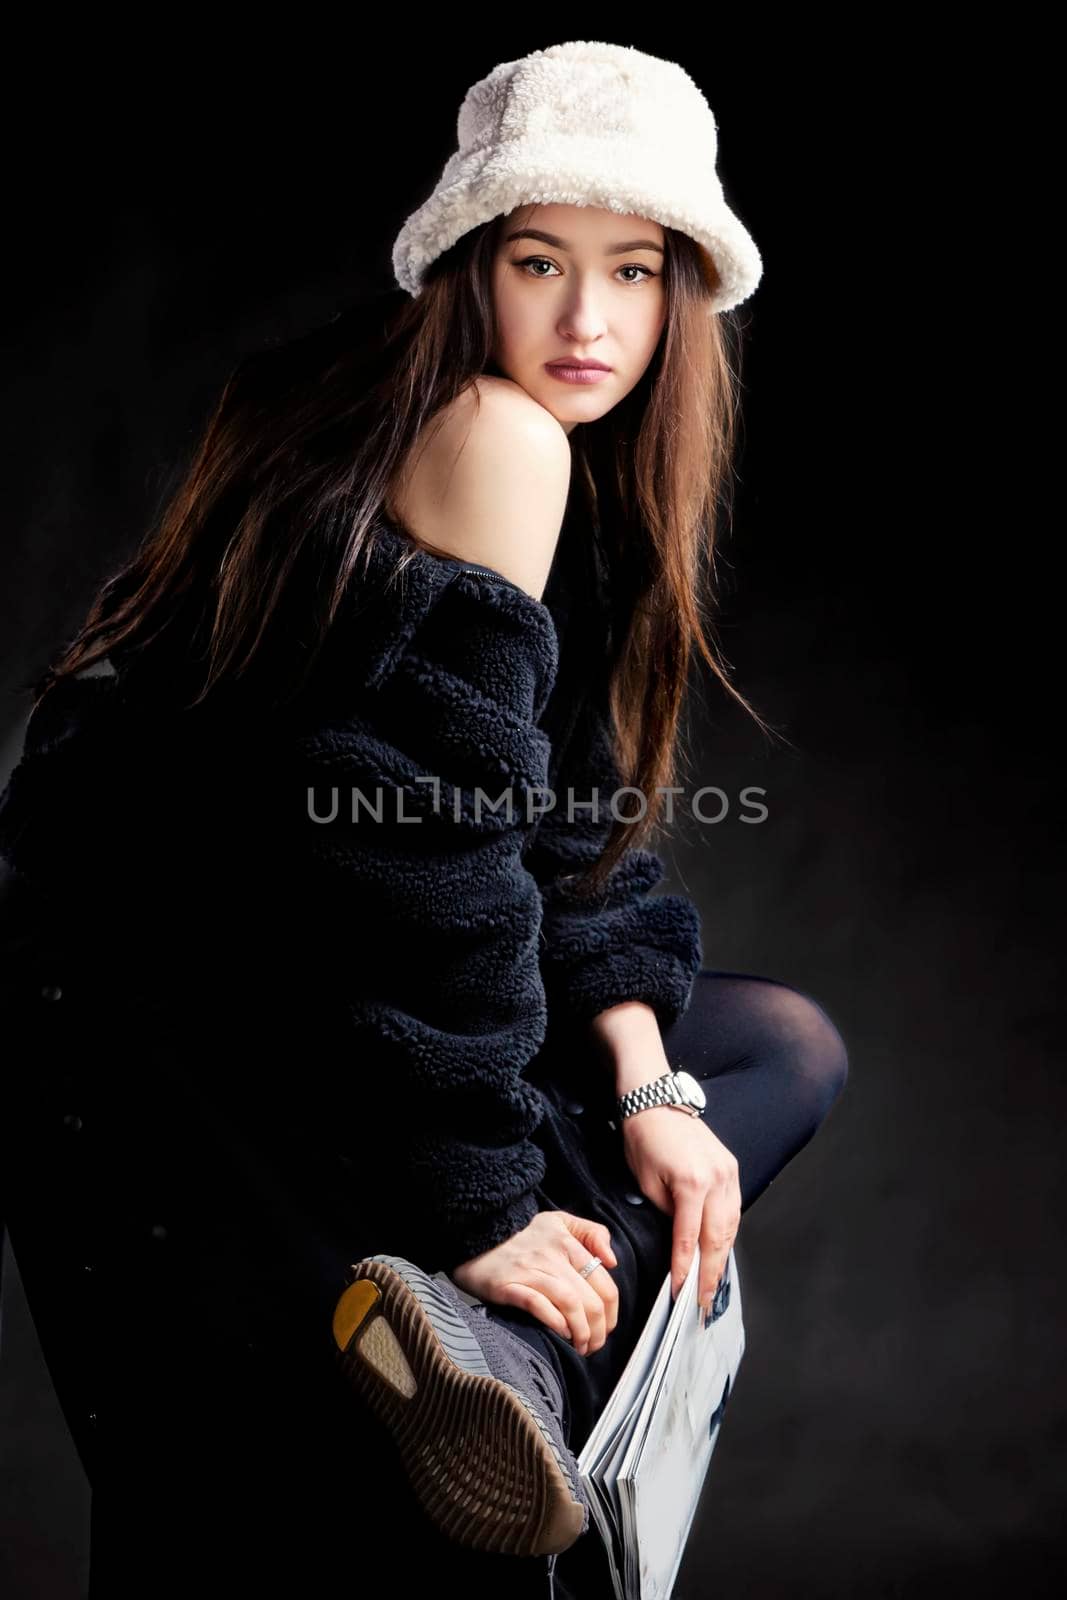 Beautiful stylish girl in dark clothes and a fashionable hat against a dark background.